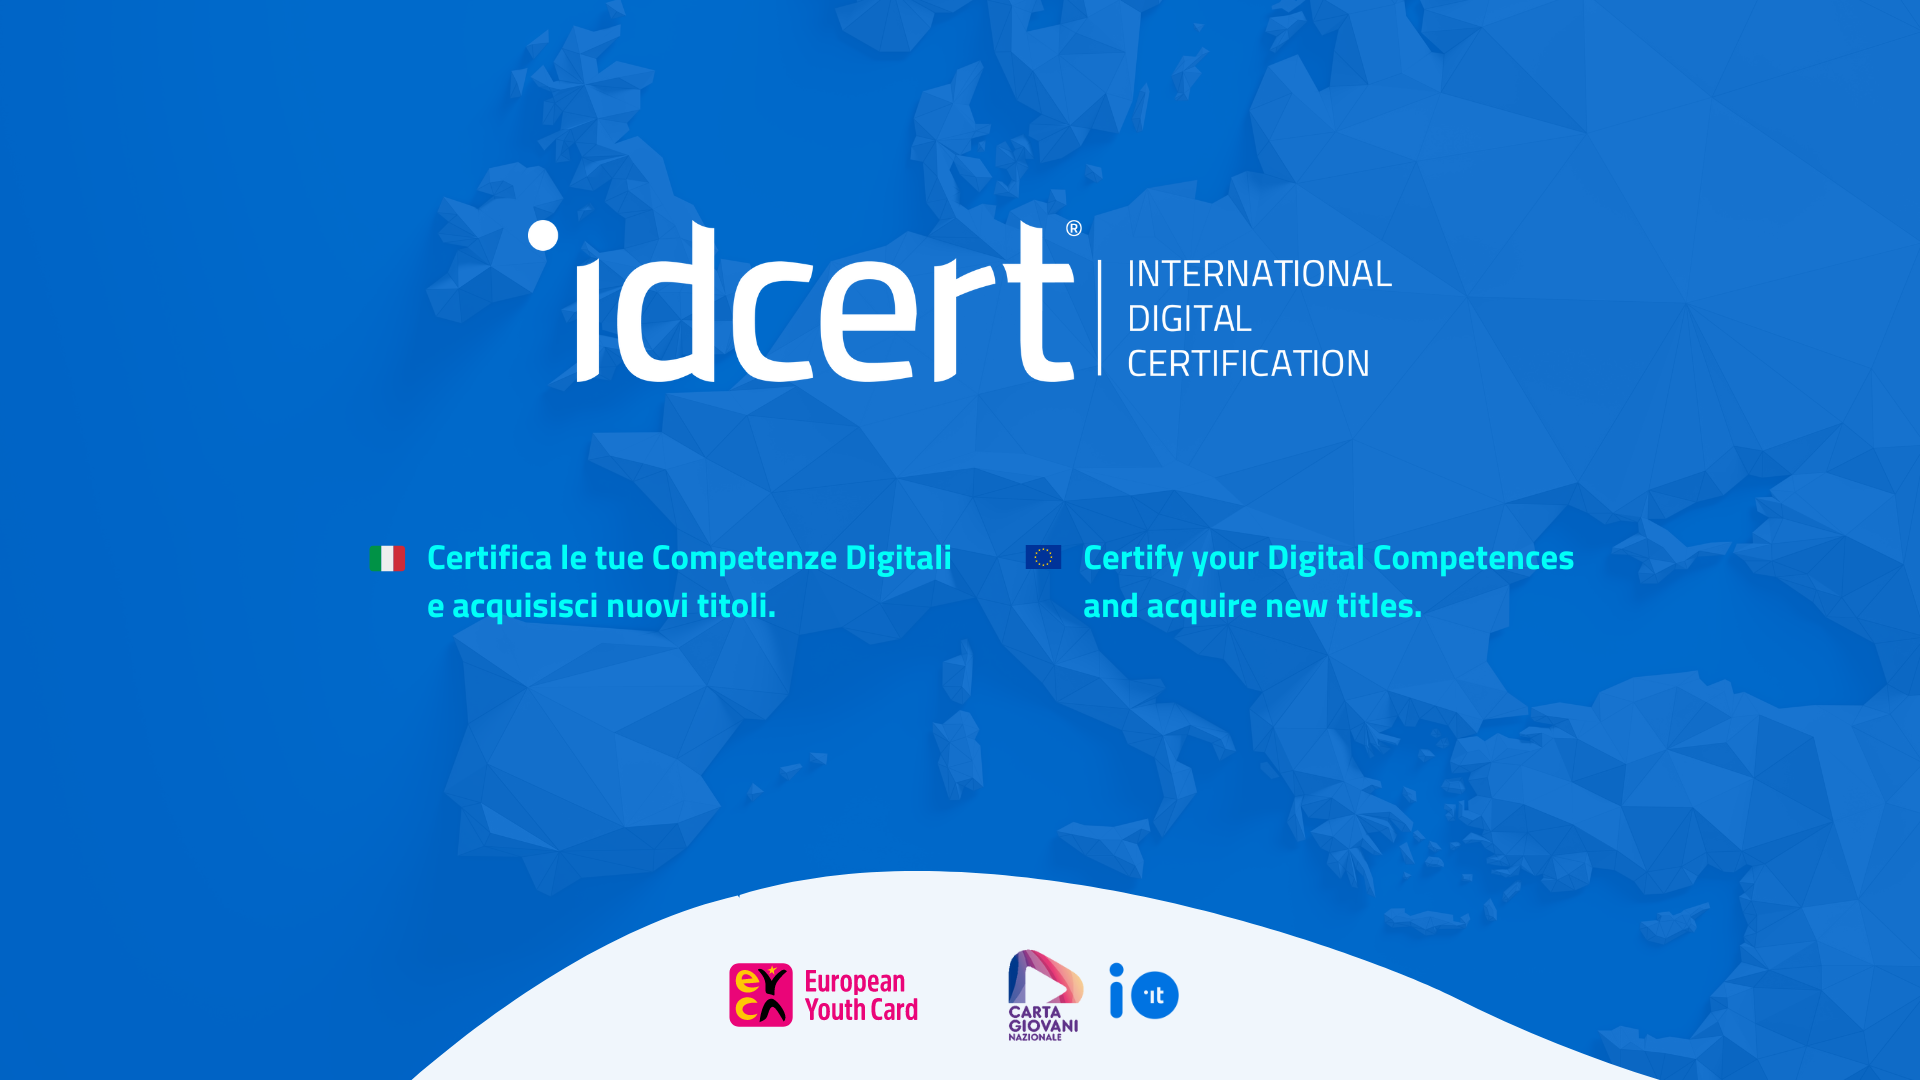 4 Online courses with IDCERT IT Certification and OpenBadge (your choice )